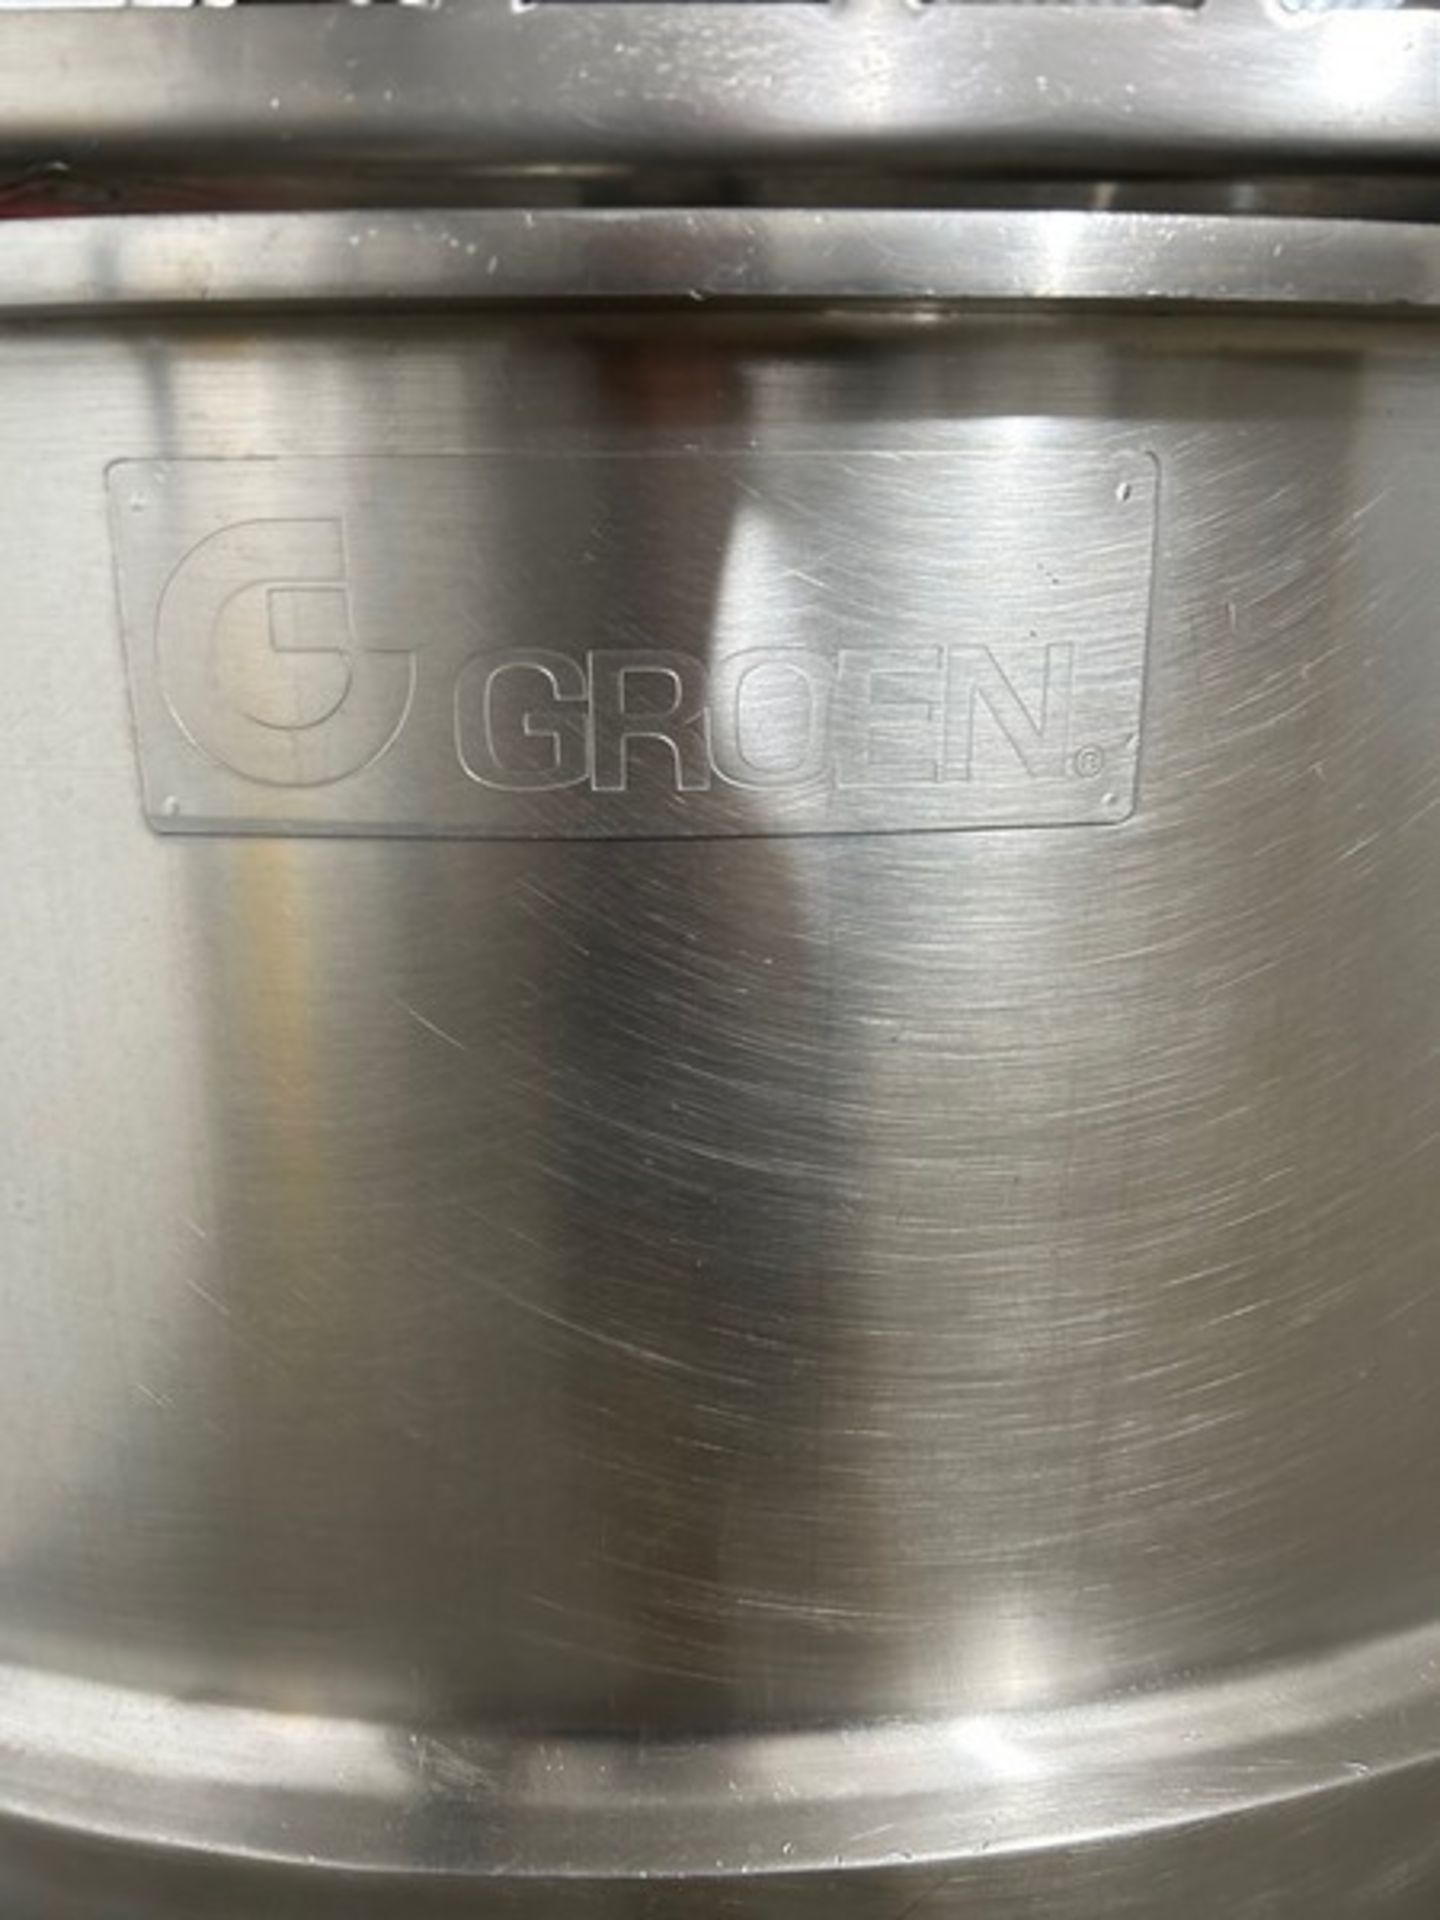 Groen 200 Gal. Sanitary S/S Jacketed Mixing Kettle with Sweep, Scrape Mixer (Located Rahway, NJ) - Bild 3 aus 4